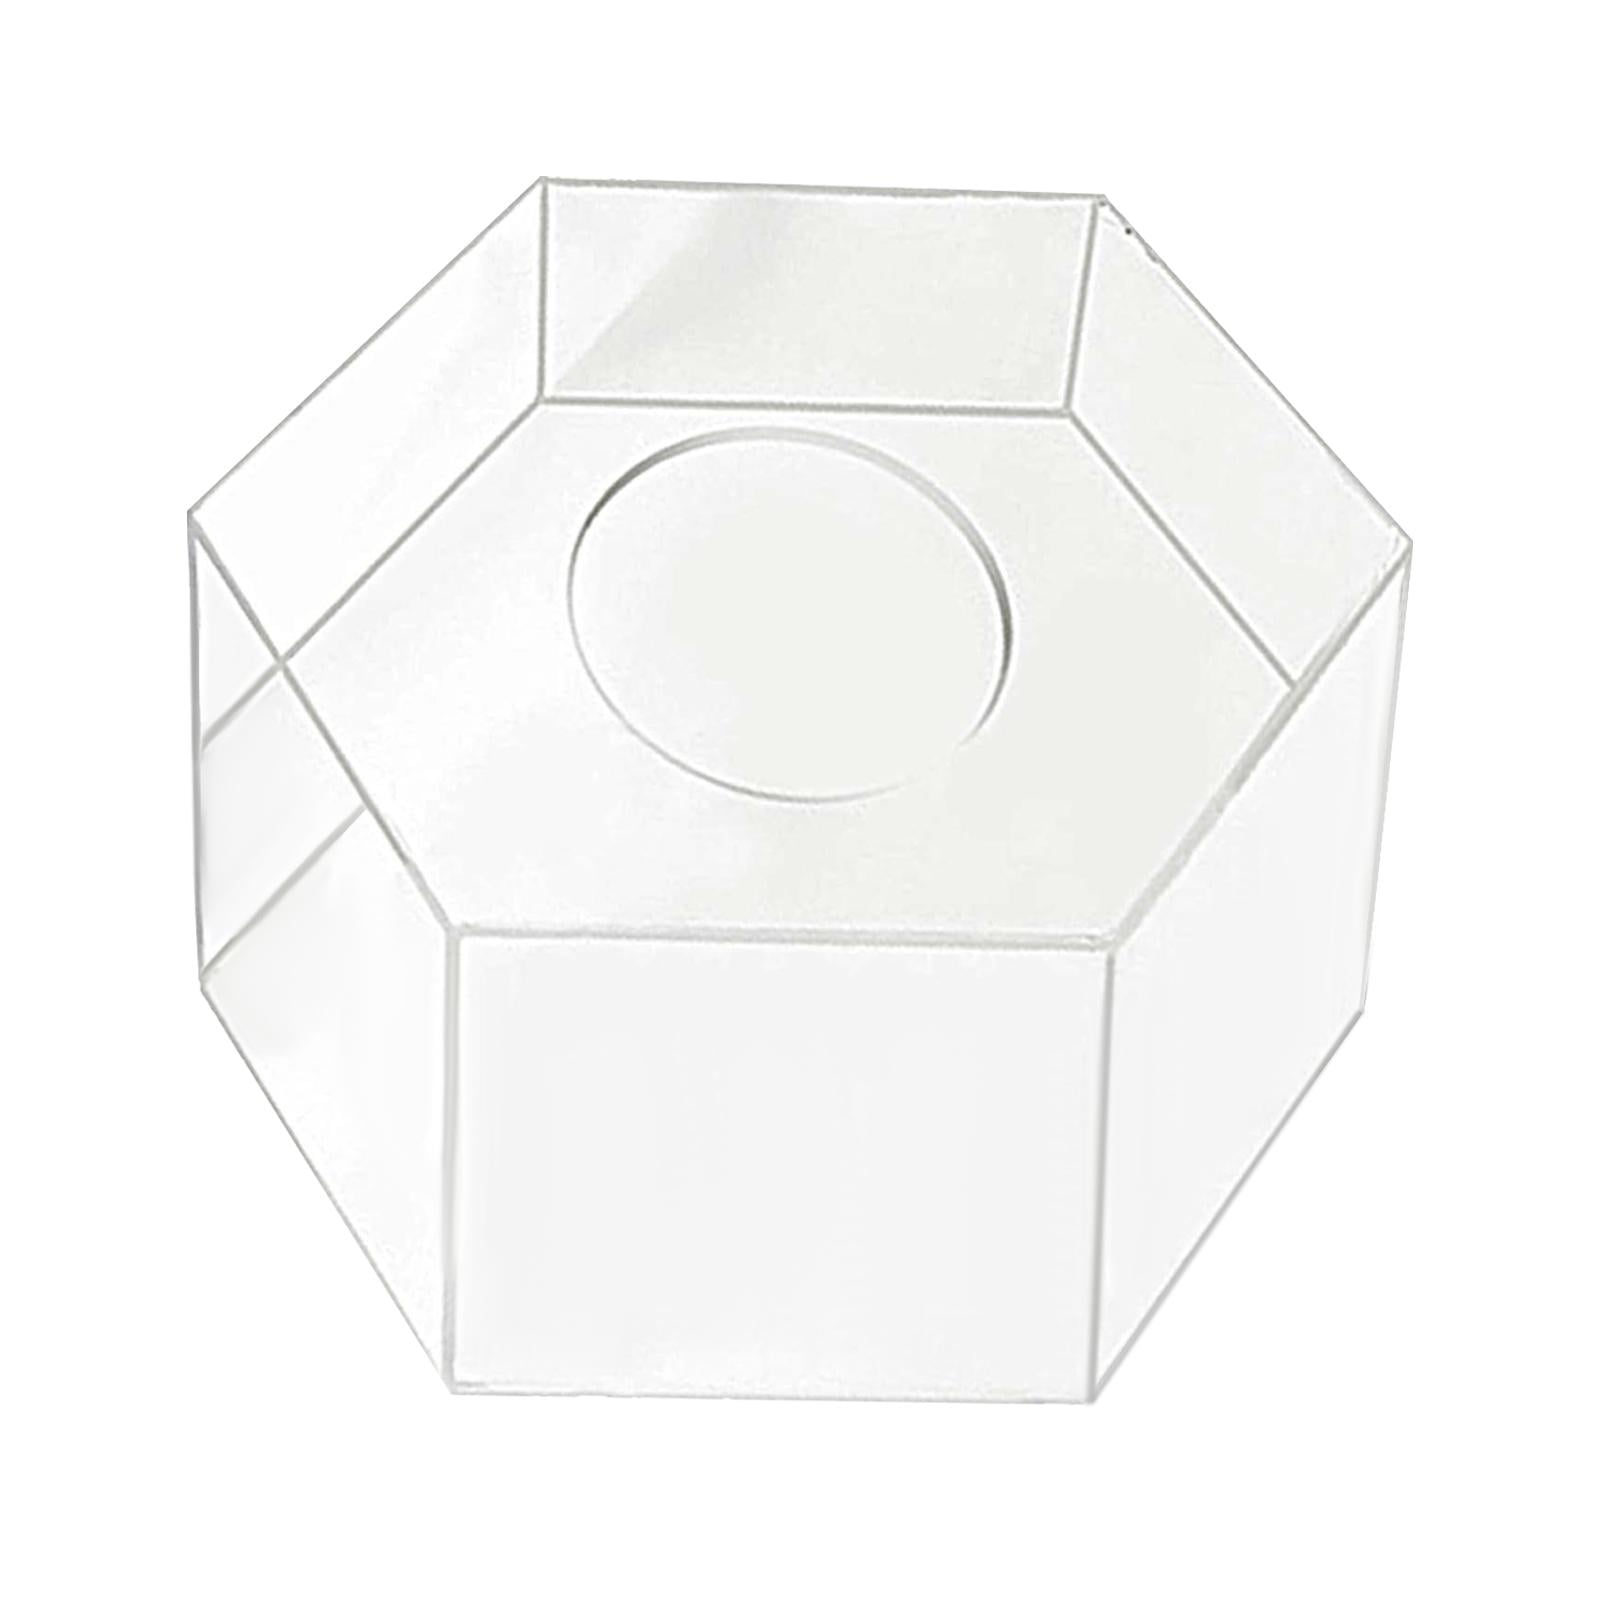 Pedestal Clear Acrylic Fillable Cake Stand Flowerr Holder Acrylic Cake Box  Stand Cake Riser for Bridals, Anniversaries, Engagements, Birthday Dia 30cm  height 10cm